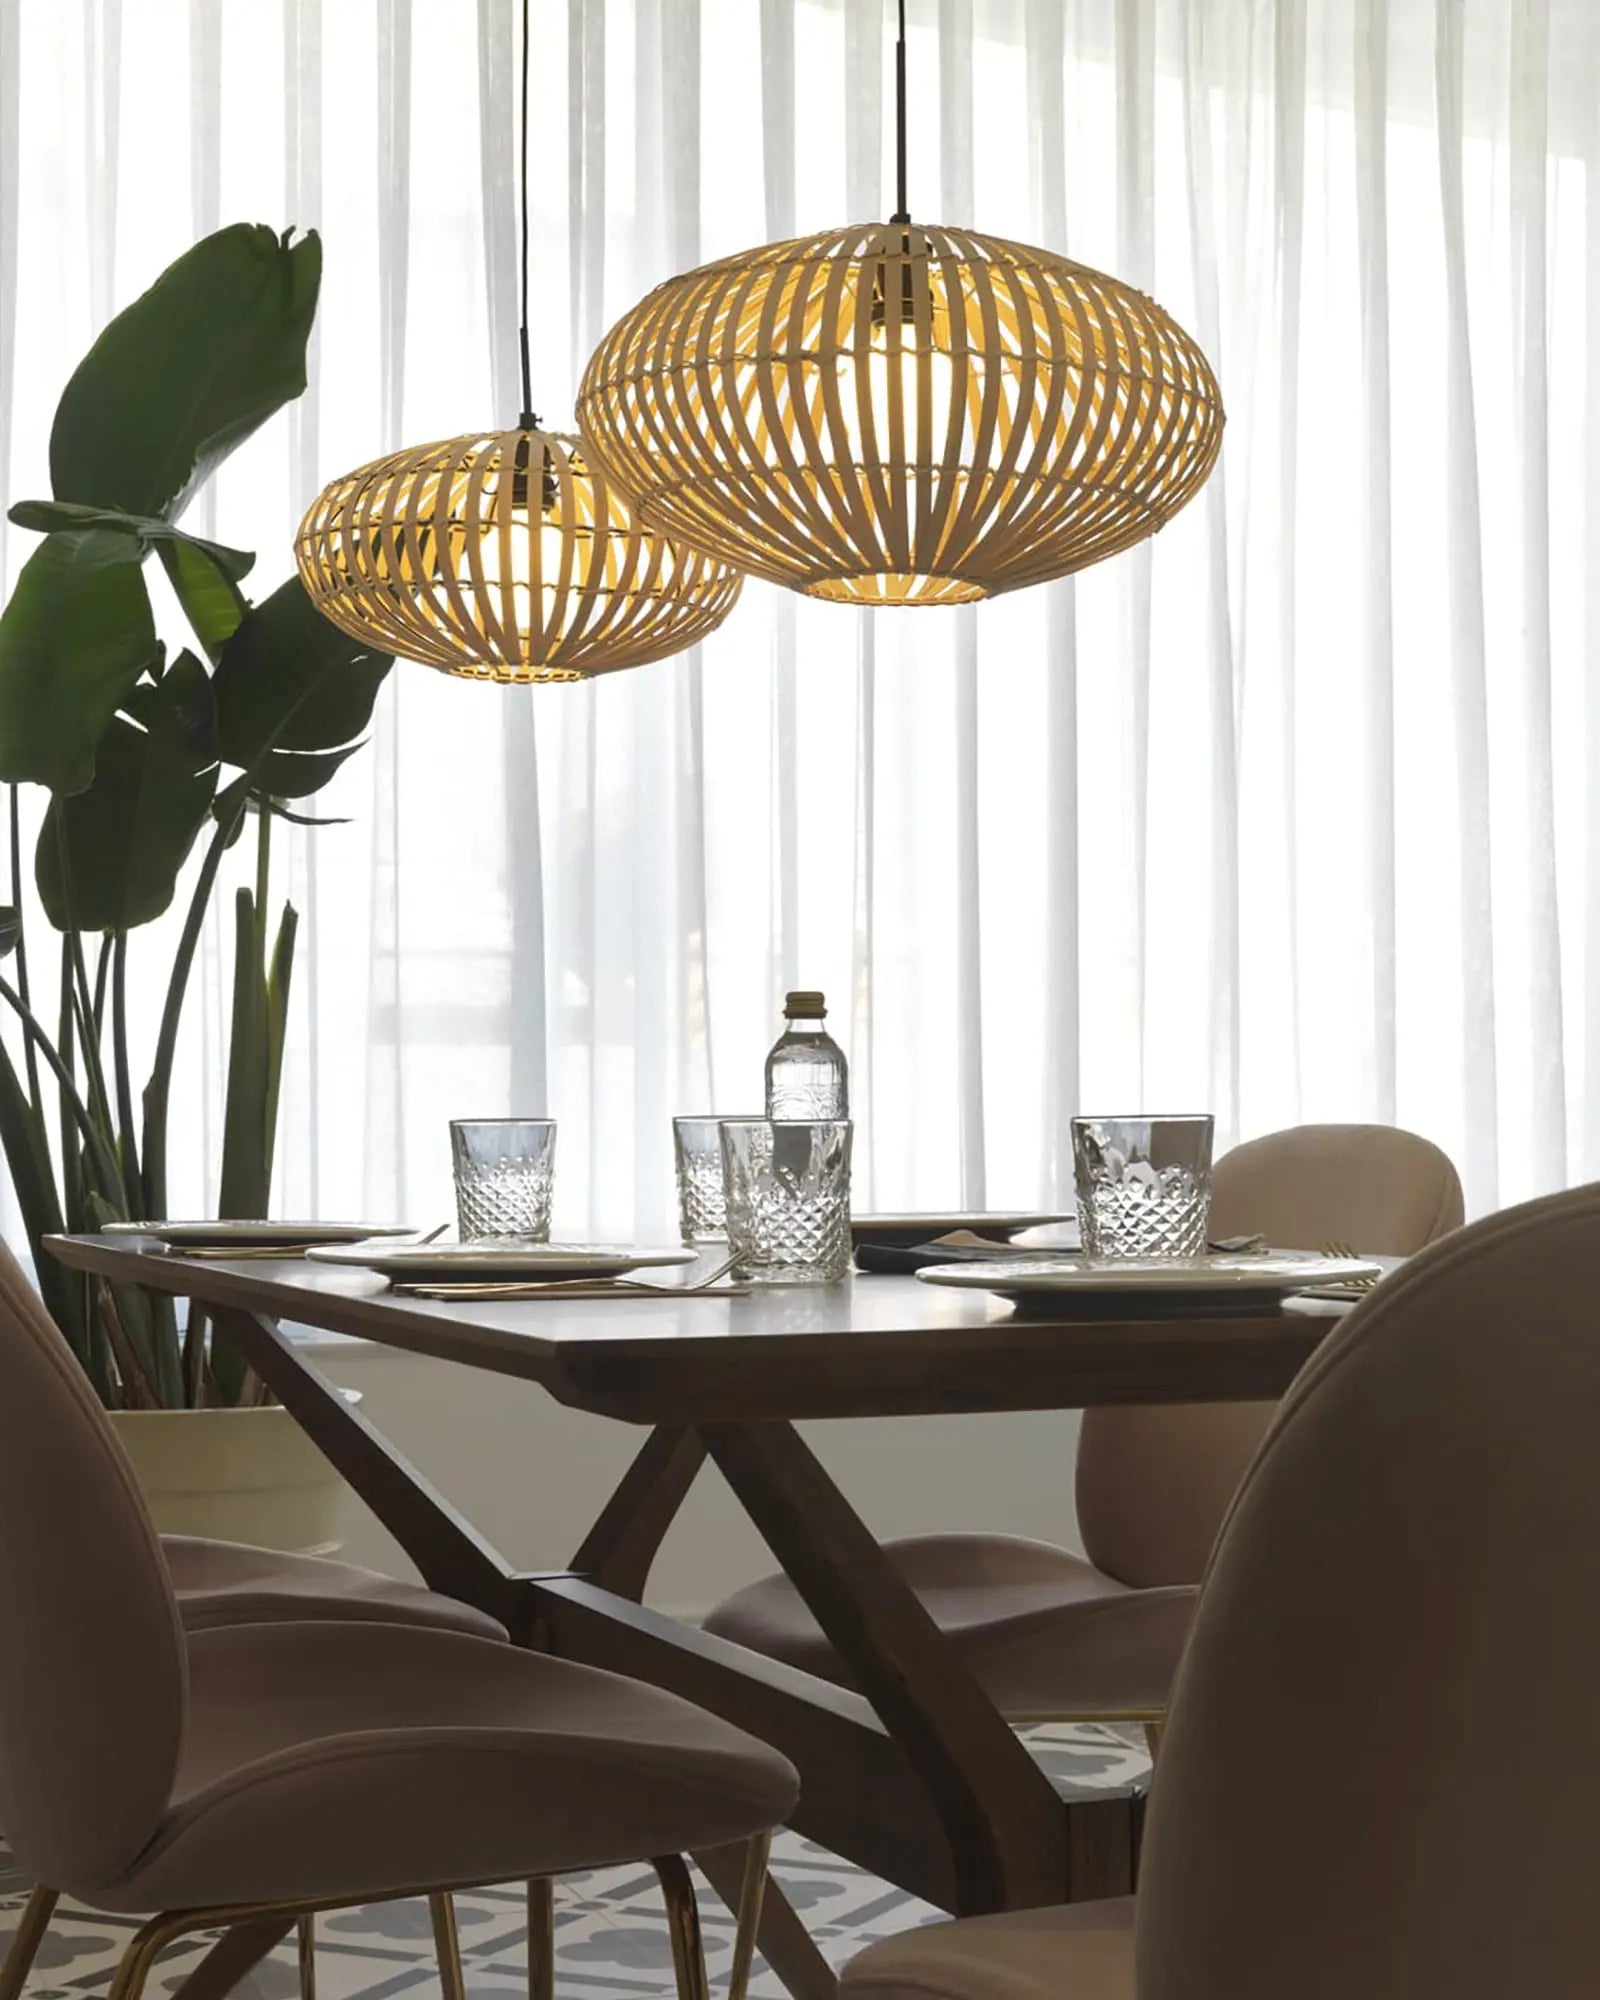 Anya contemporary organic pendant light cluster over a dining table